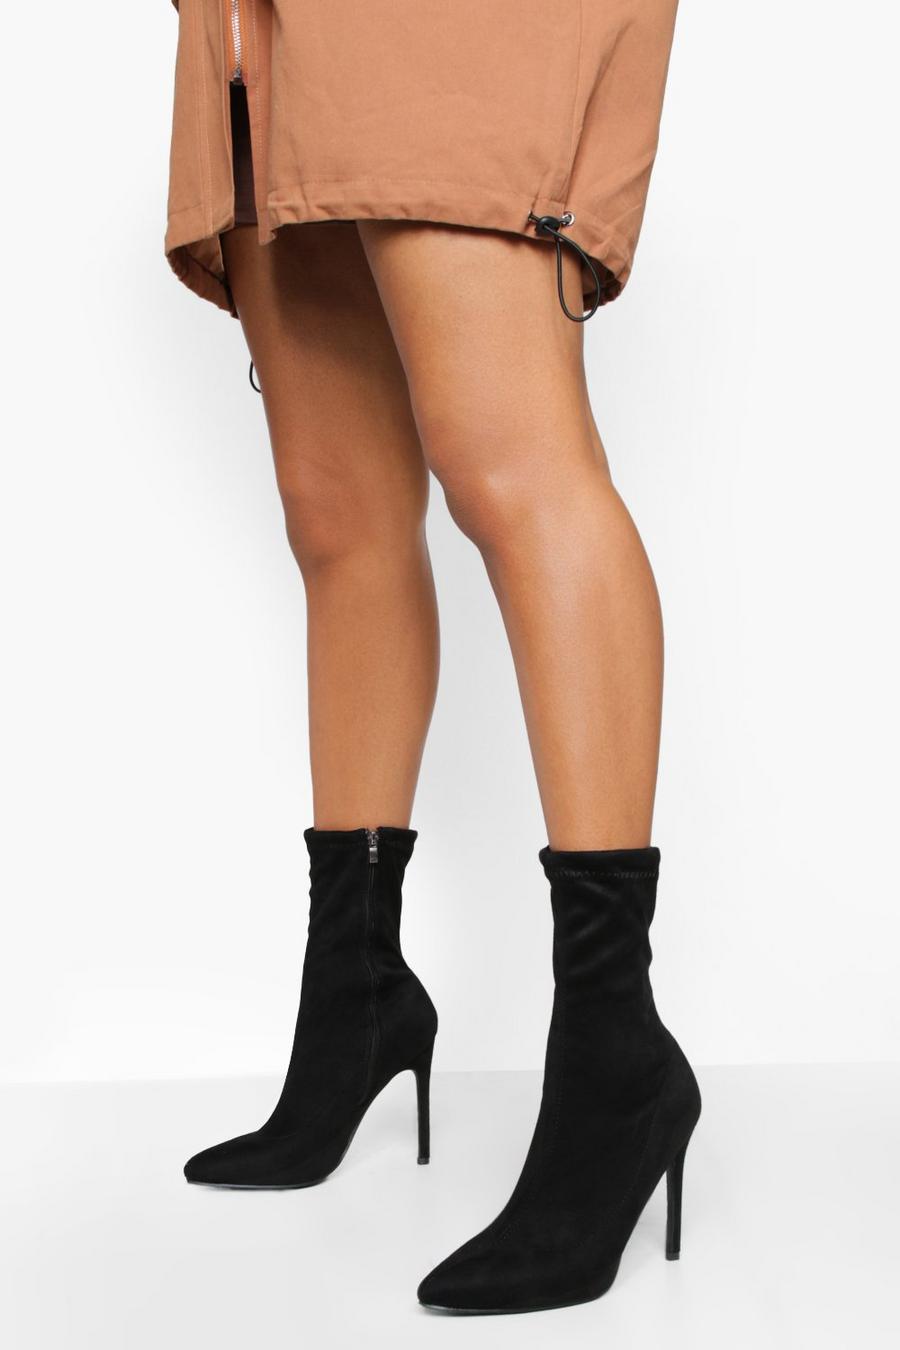 Black Pointed Toe Stiletto Heel Sock Boots image number 1